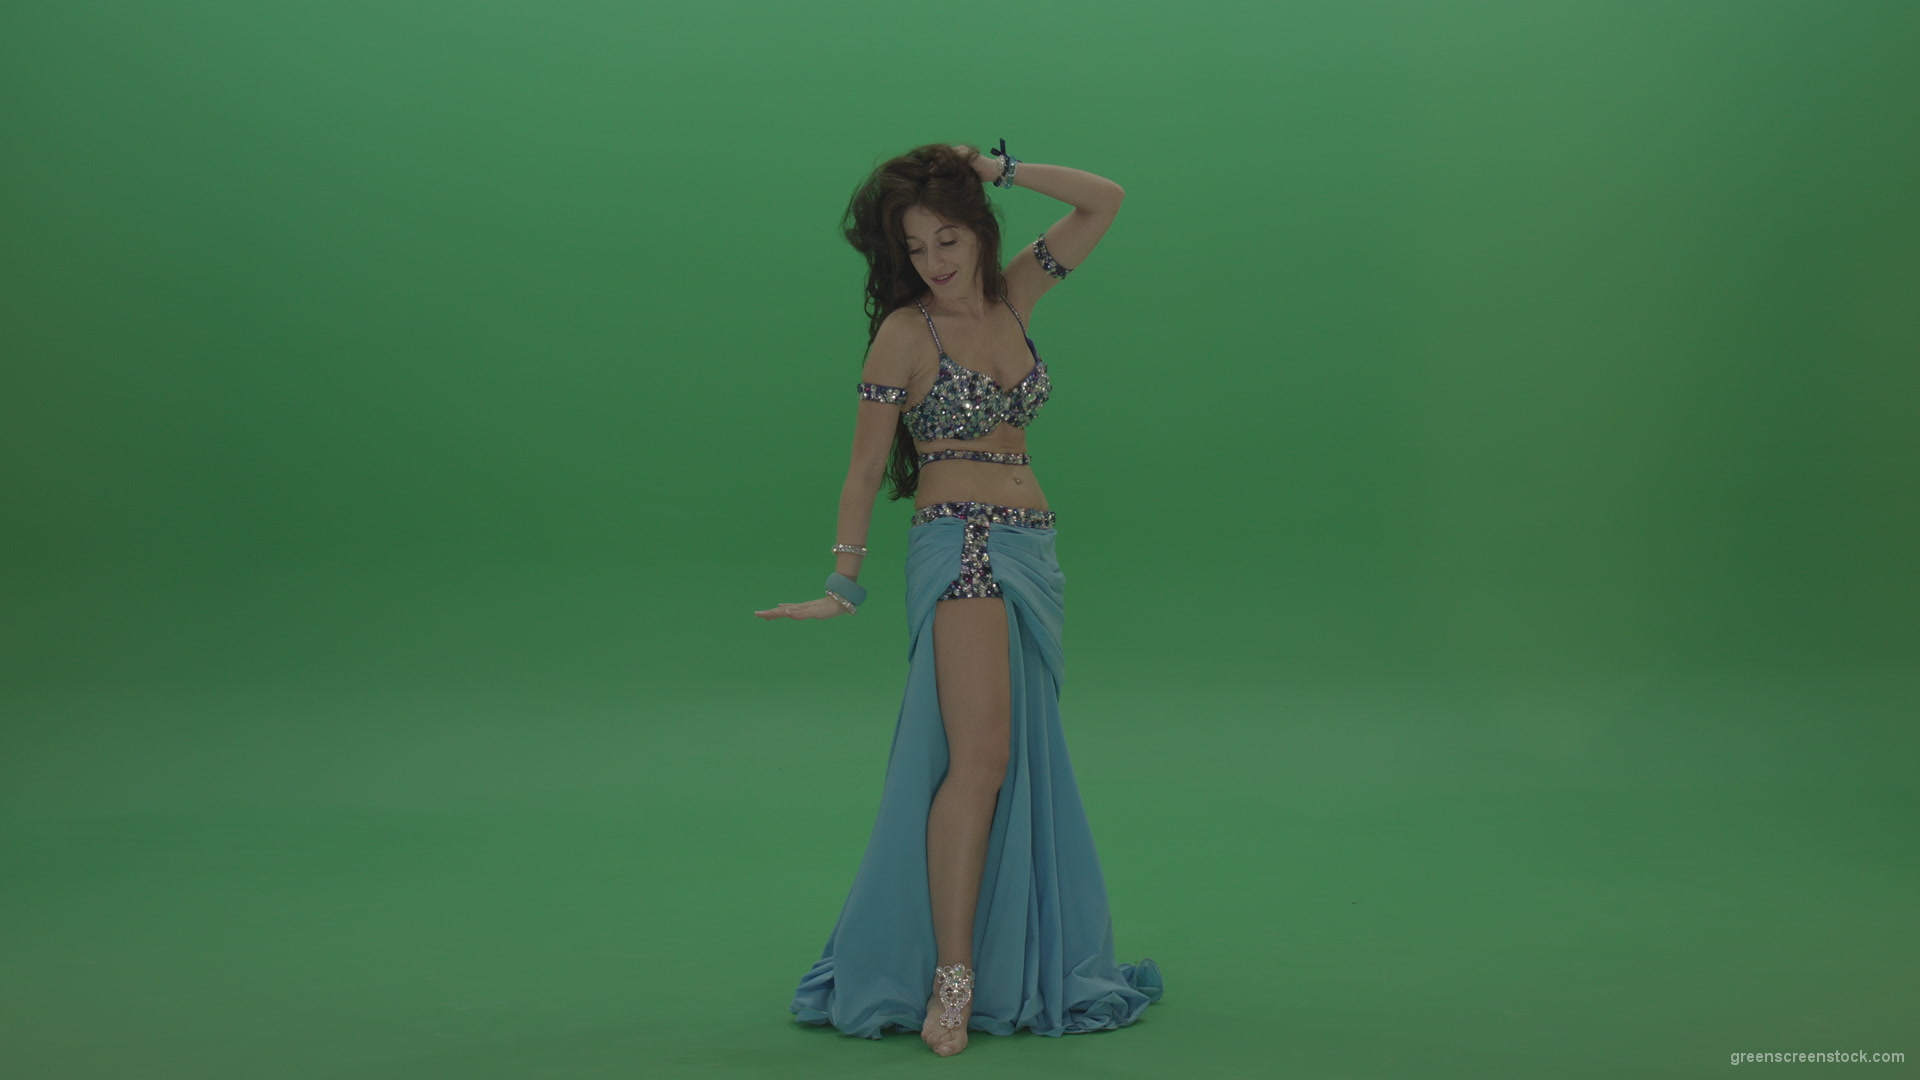 Awesome-belly-dancer-in-blue-wear-display-amazing-dance-moves-over-chromakey-background_007 Green Screen Stock